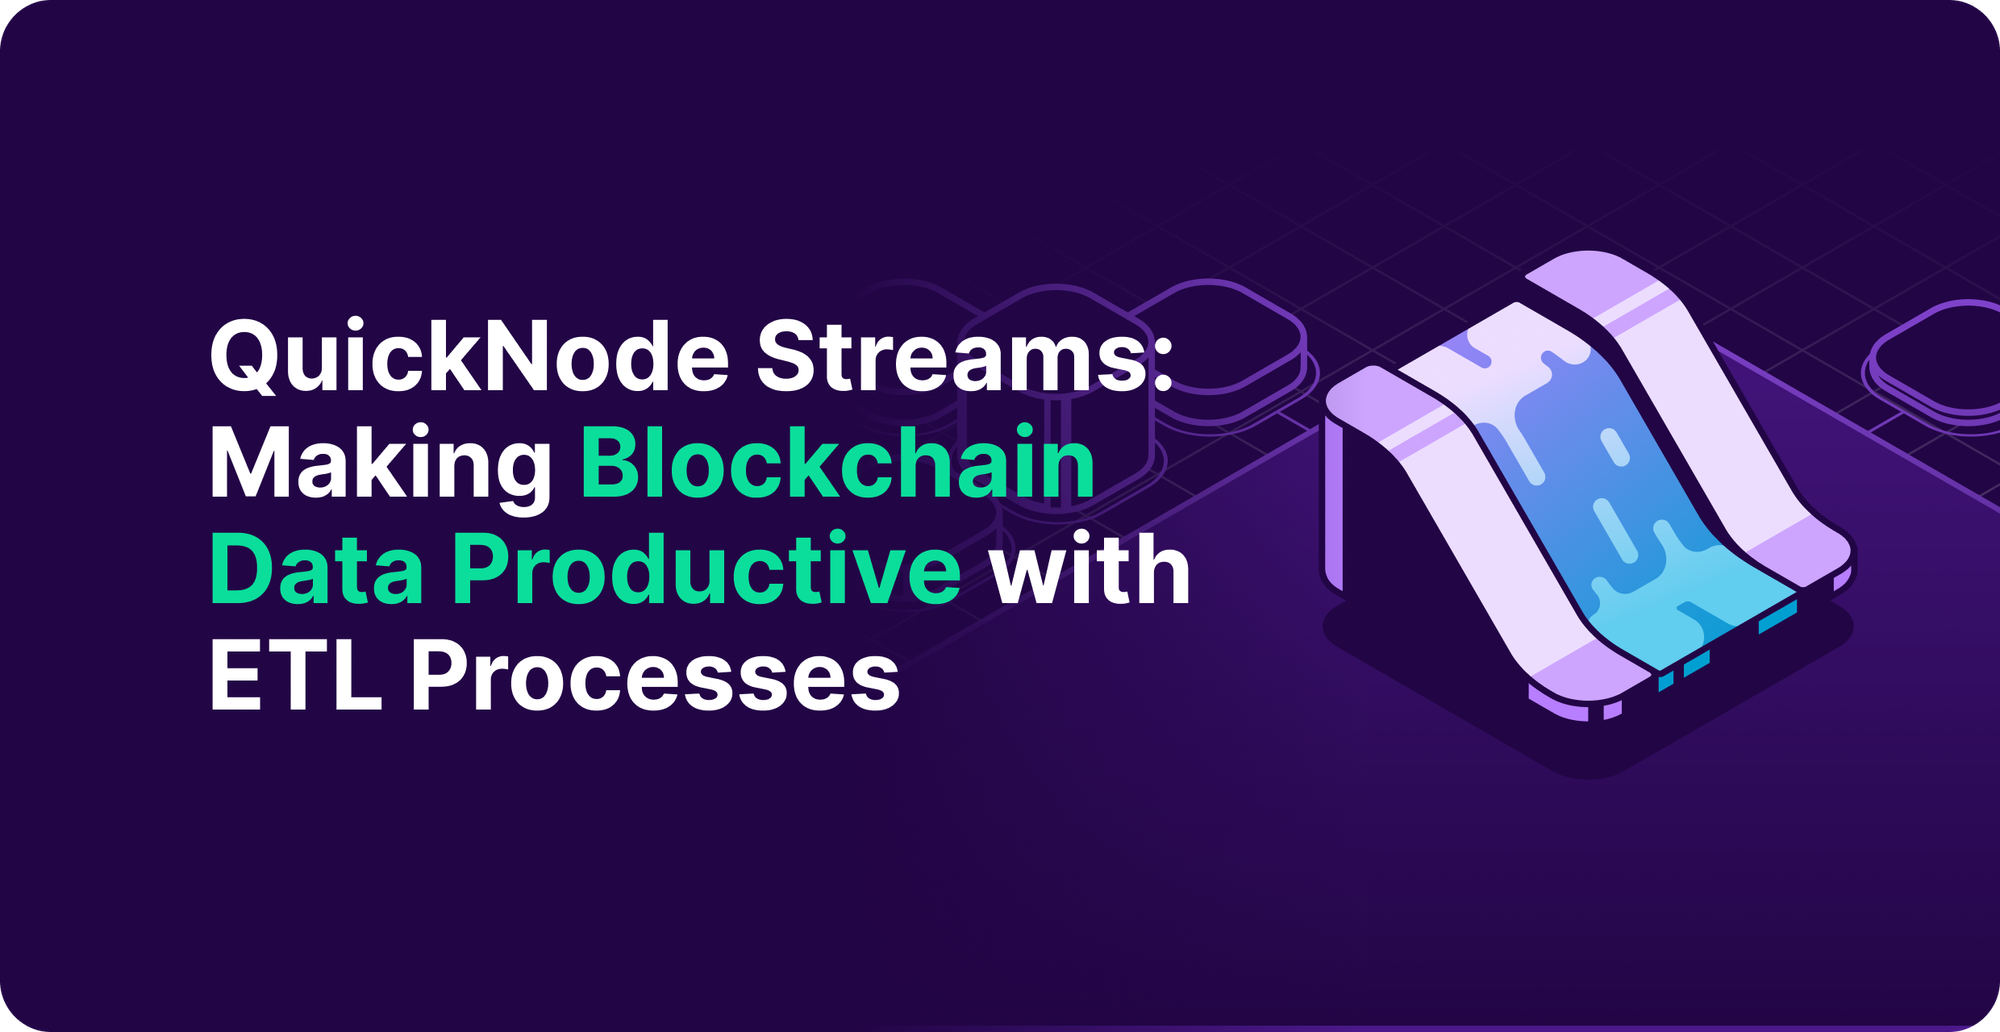 QuickNode Streams: Making Blockchain Data Productive With ETL Processes